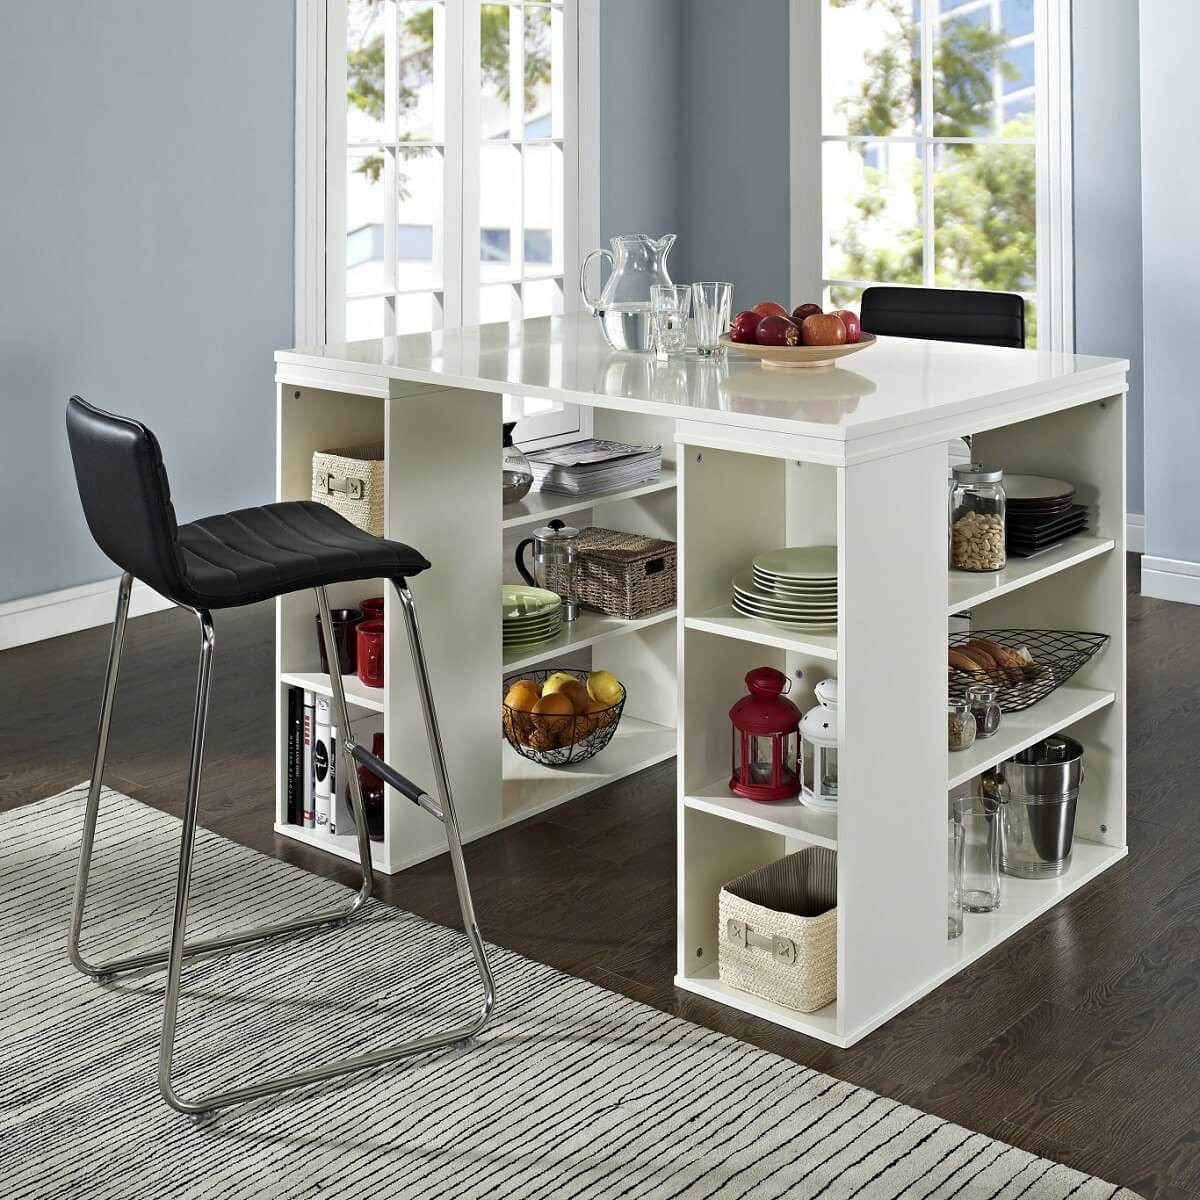 Kitchen Storage Tables
 19 Small Kitchen Tables For Conserving Space • Insteading